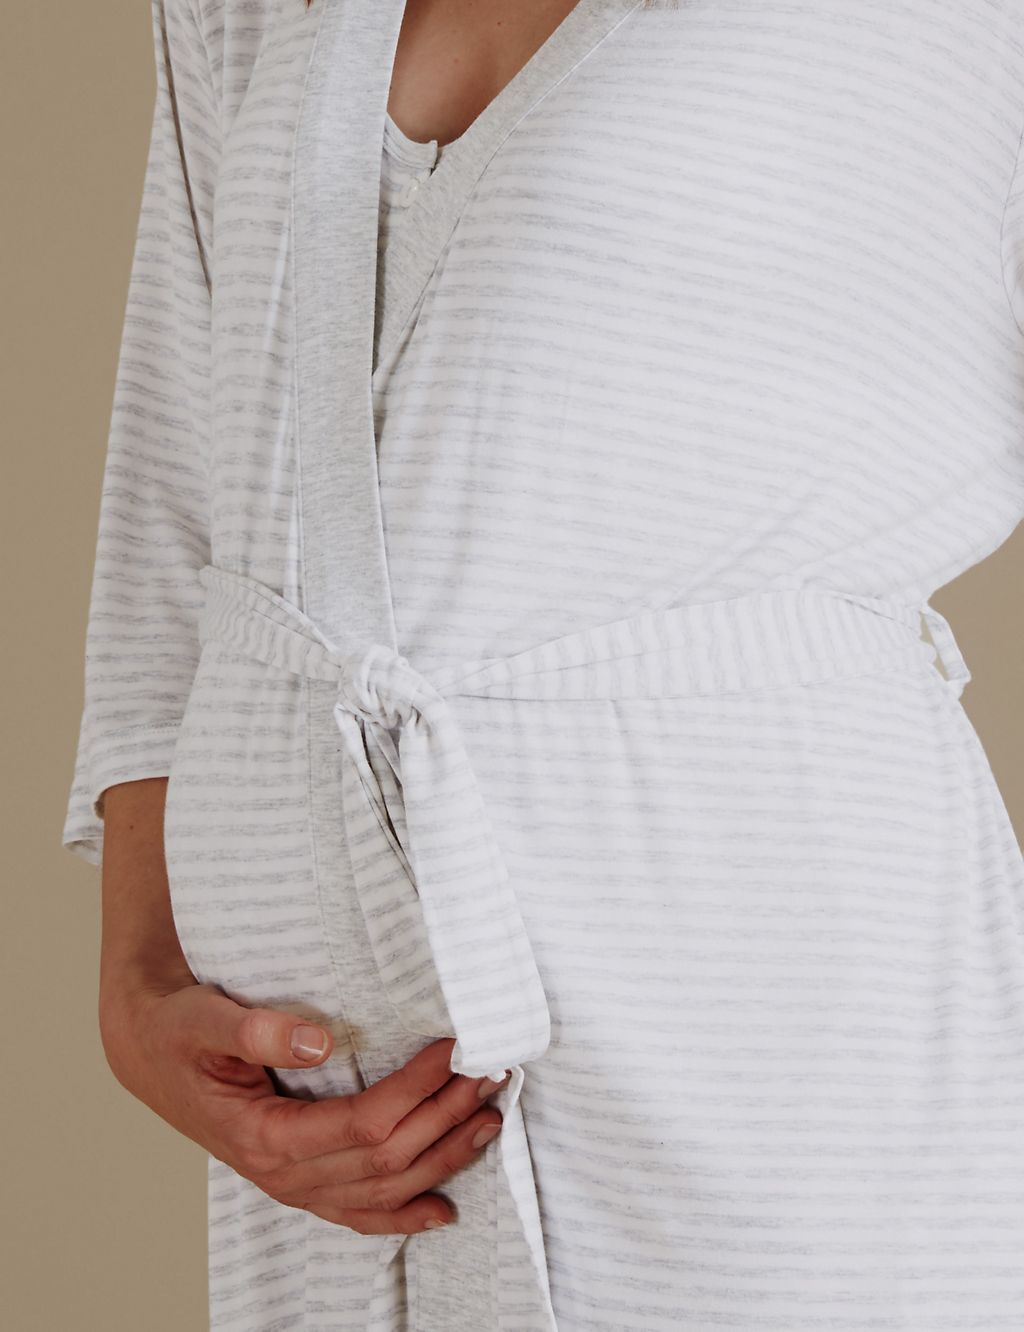 Maternity Striped Short Dressing Gown 6 of 7